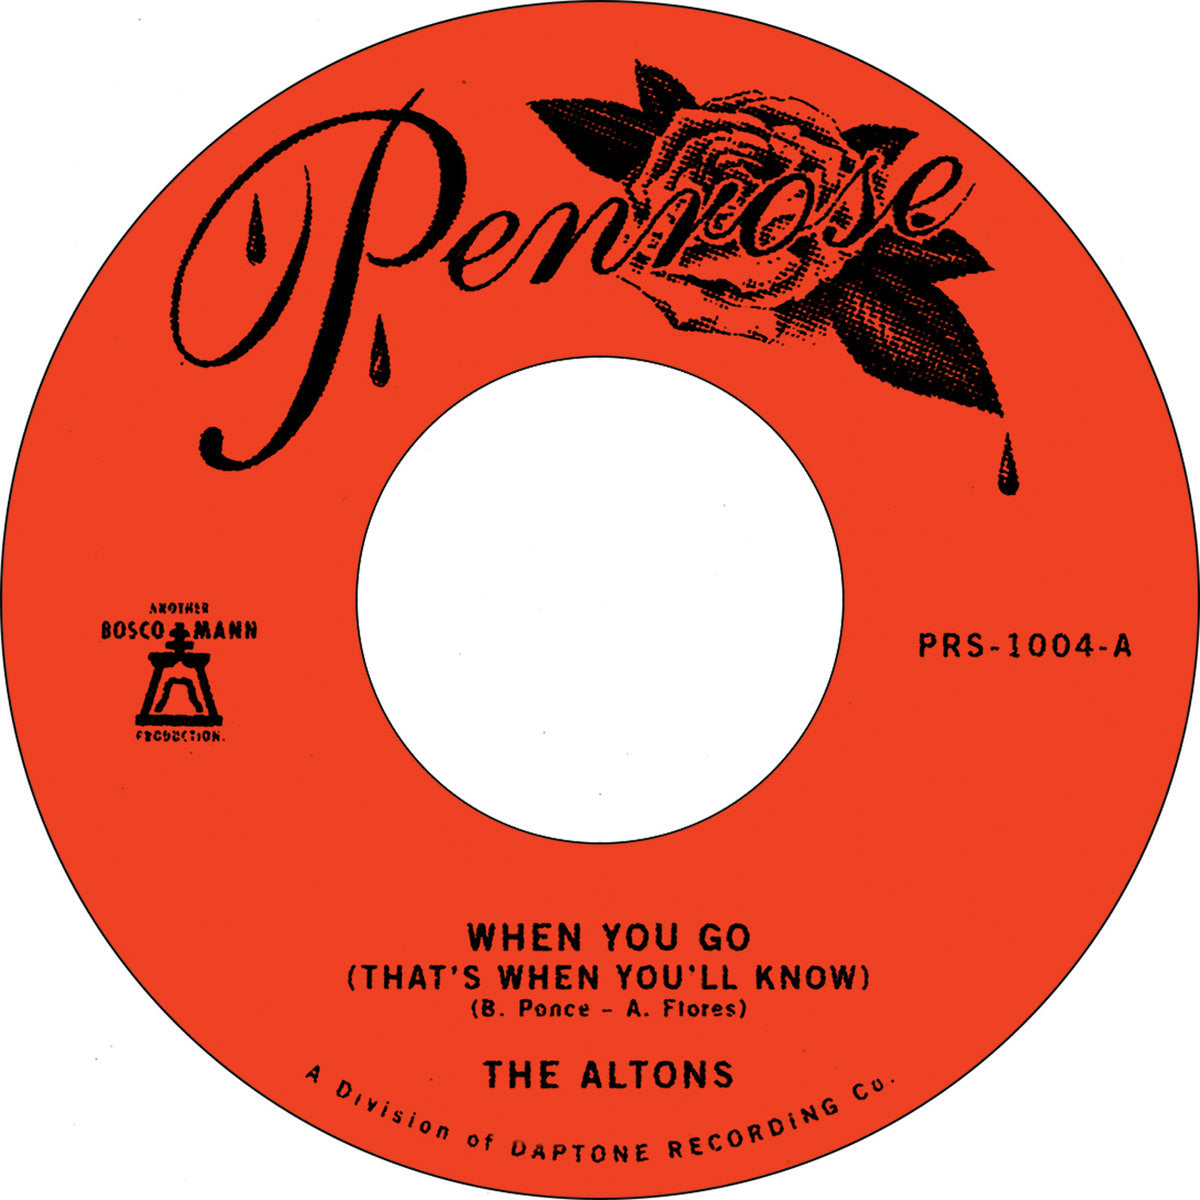 When You Go (That's When You'll Know) b/w Over and Over (New 7")